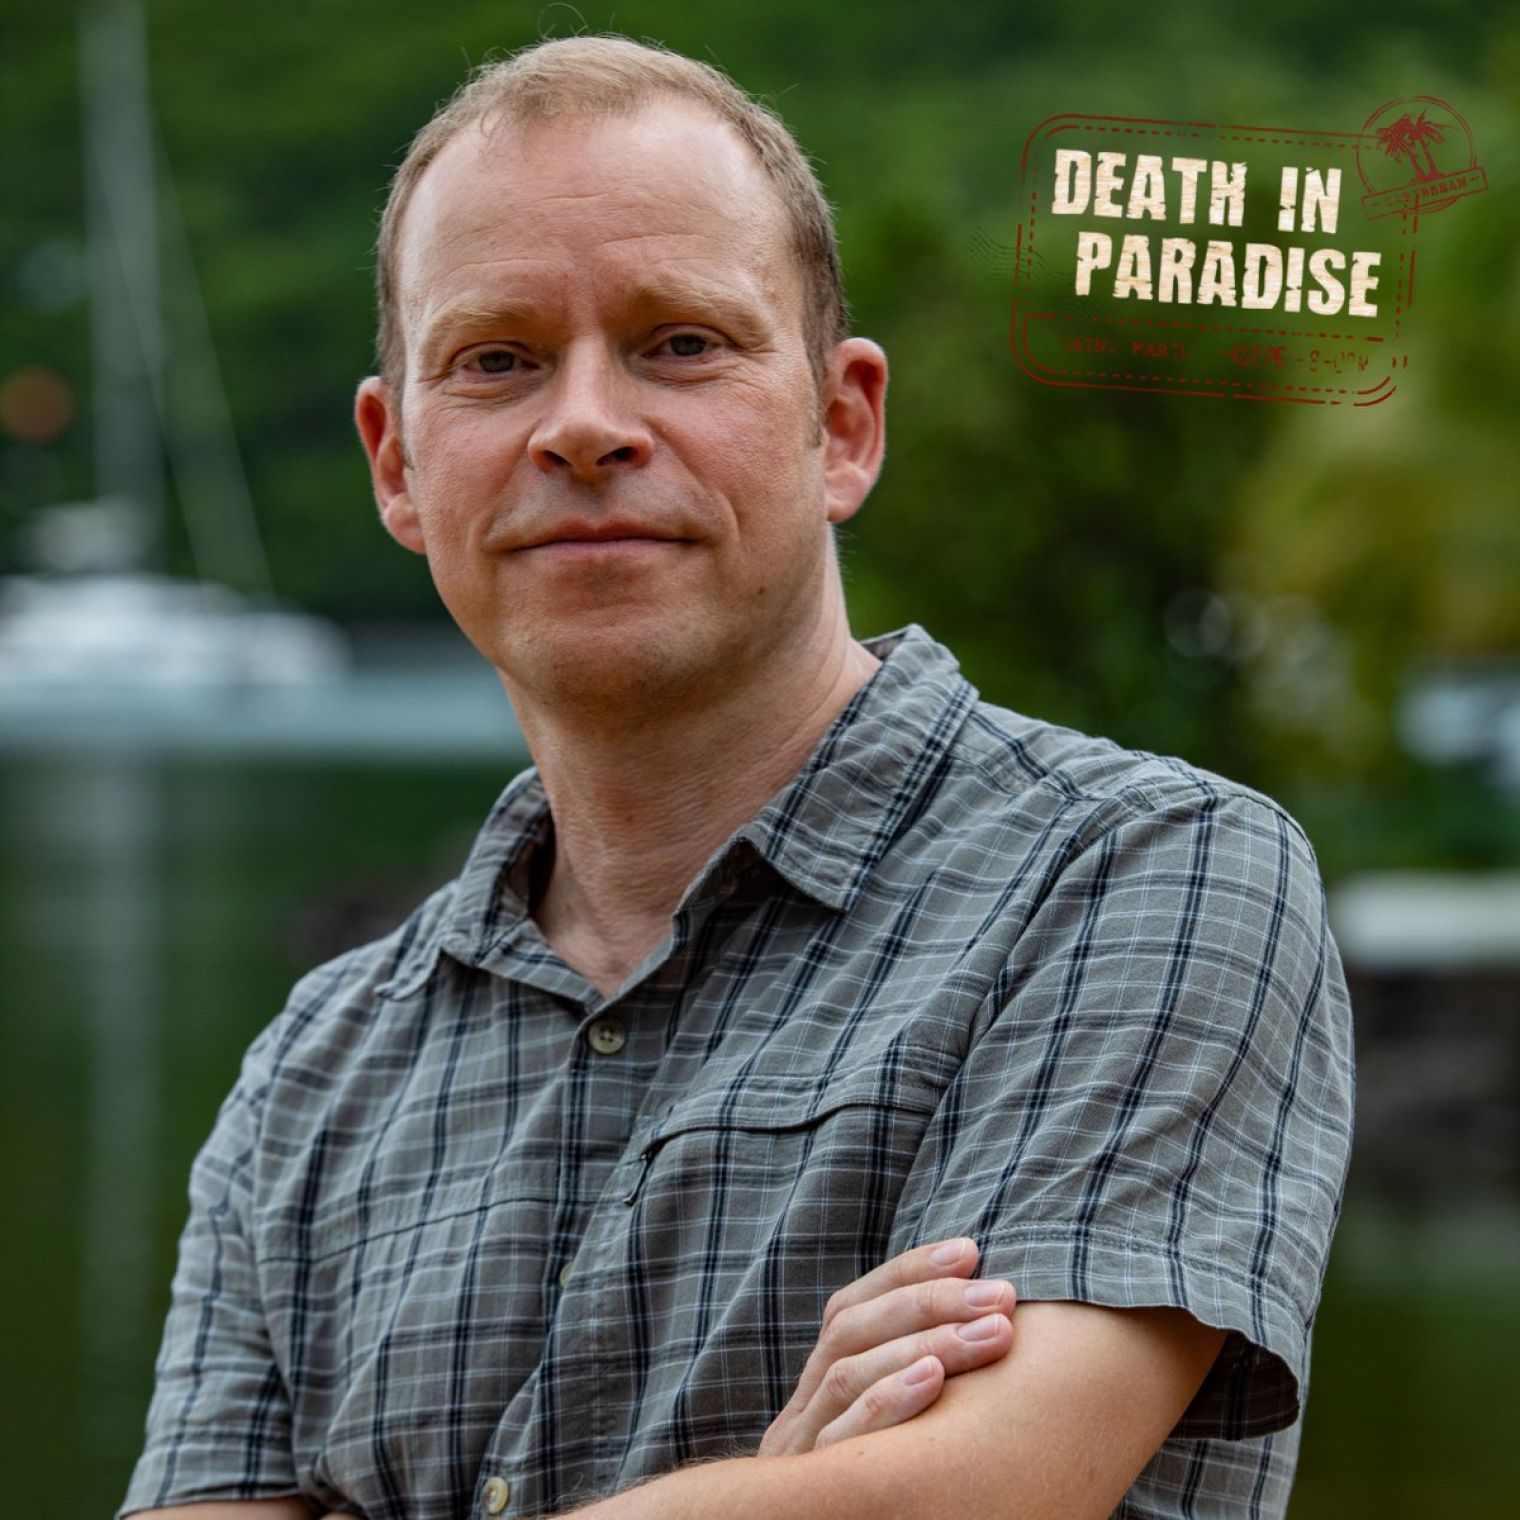 The BBC has announced that Robert Webb has joined the cast for Series 12 of Death in Paradise